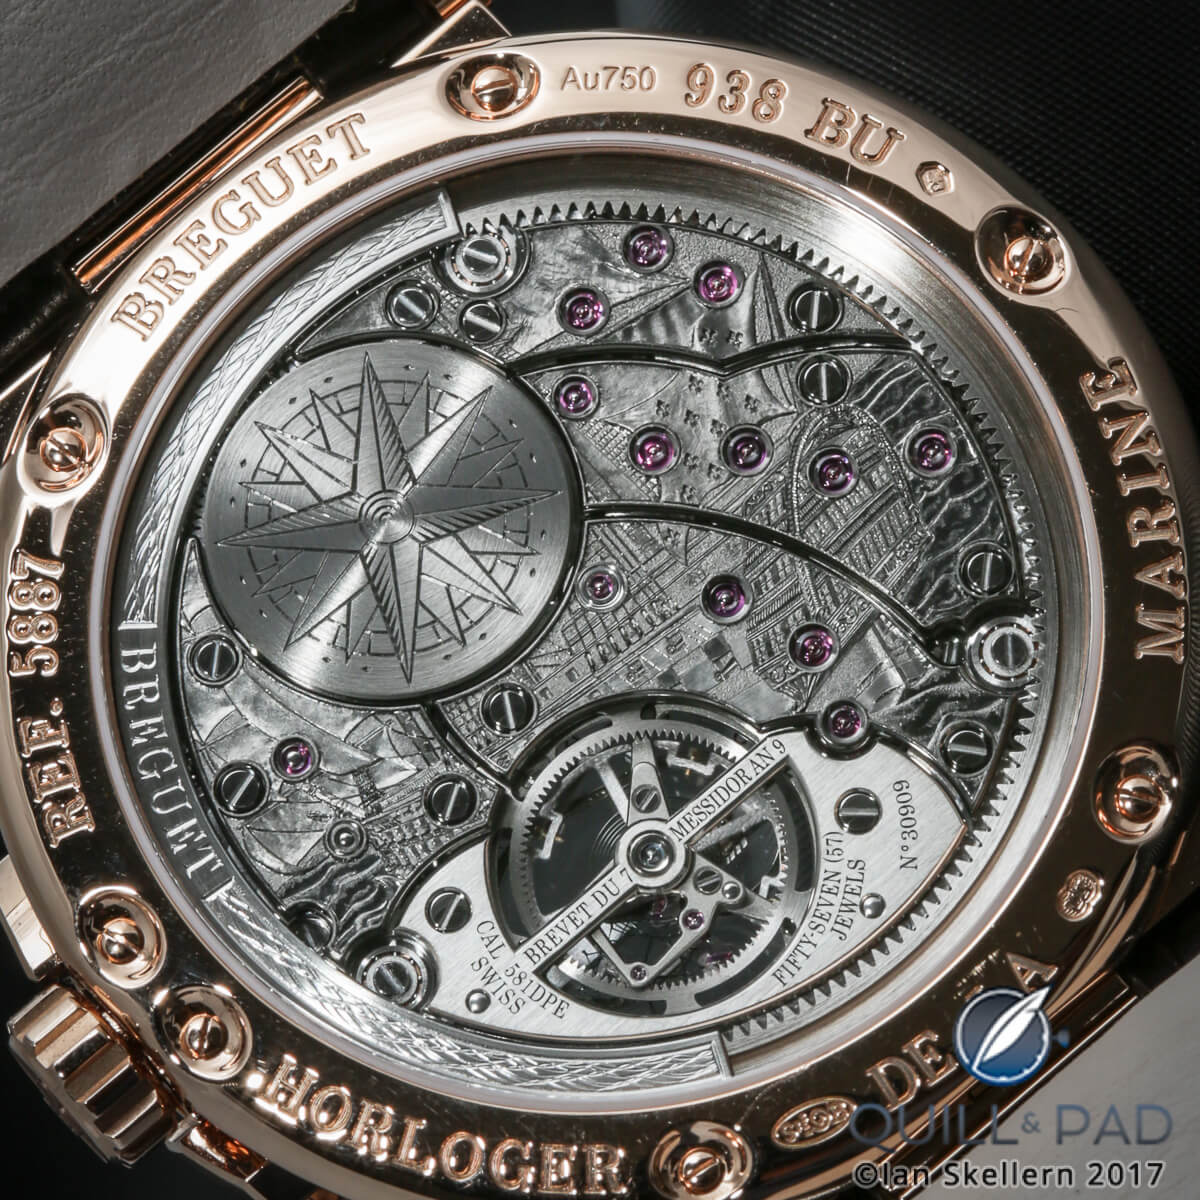 View through the display back to the engraved movement of theBreguet Marine Équation Marchante Ref. 5887